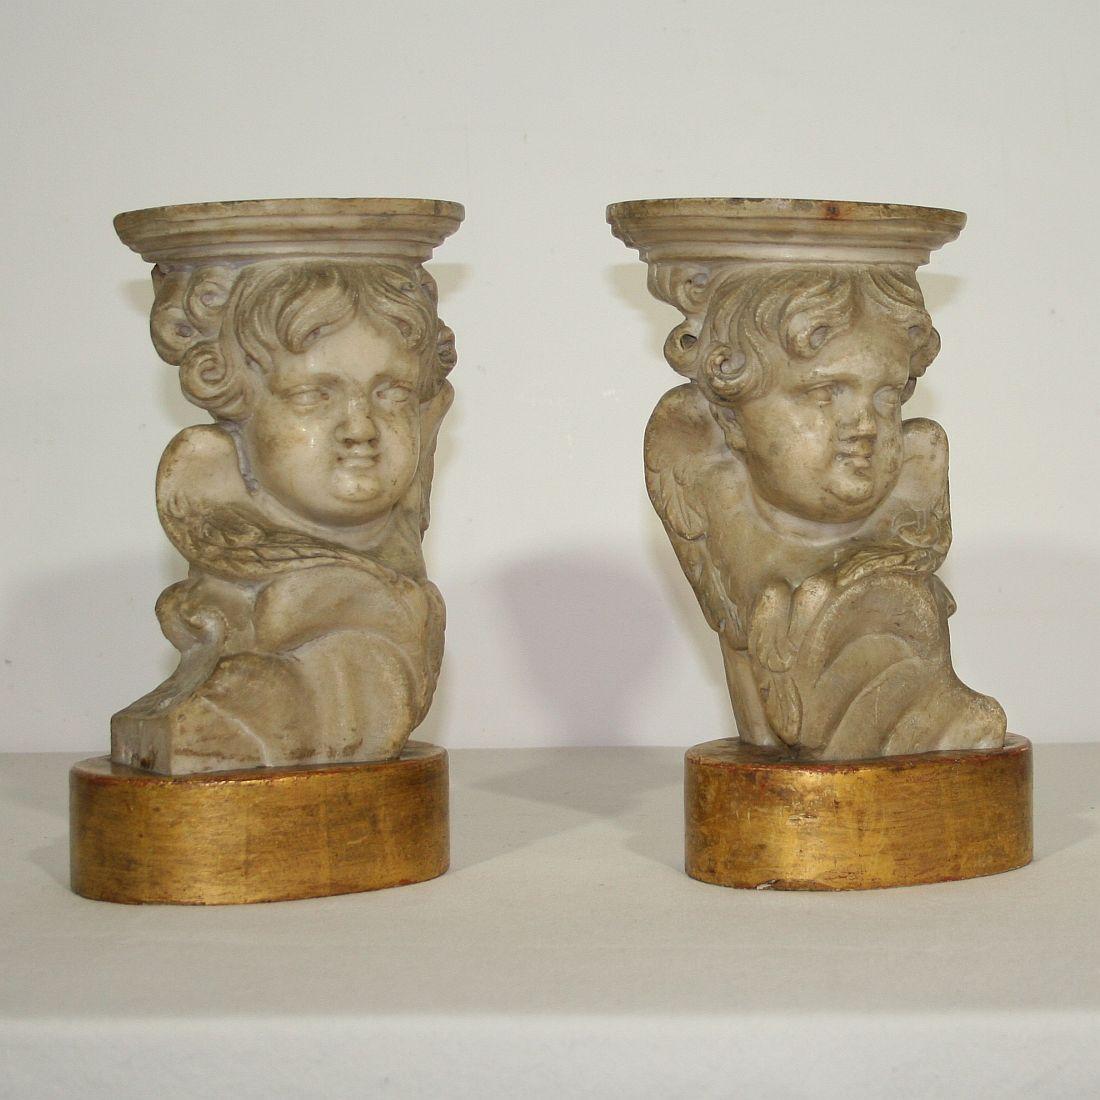 Spectacular and unique couple of 17th-18th century hand carved marble angels once mounted on these giltwood pedestals
Italy, circa 1650-1750.
Weathered, small losses. More pictures are available on request.